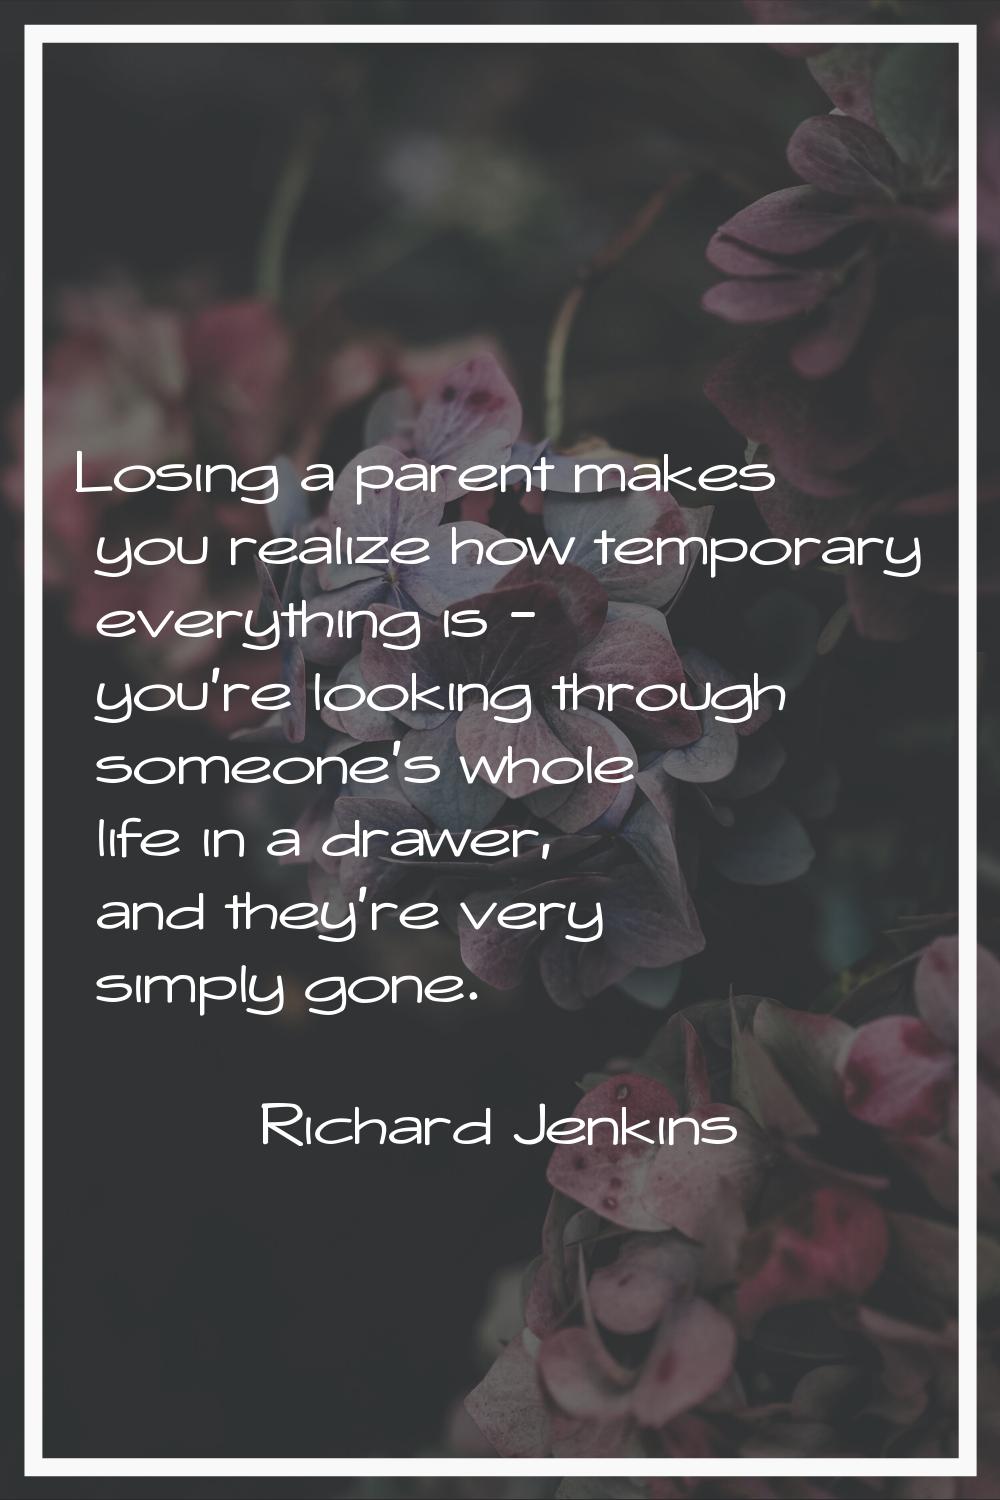 Losing a parent makes you realize how temporary everything is - you're looking through someone's wh